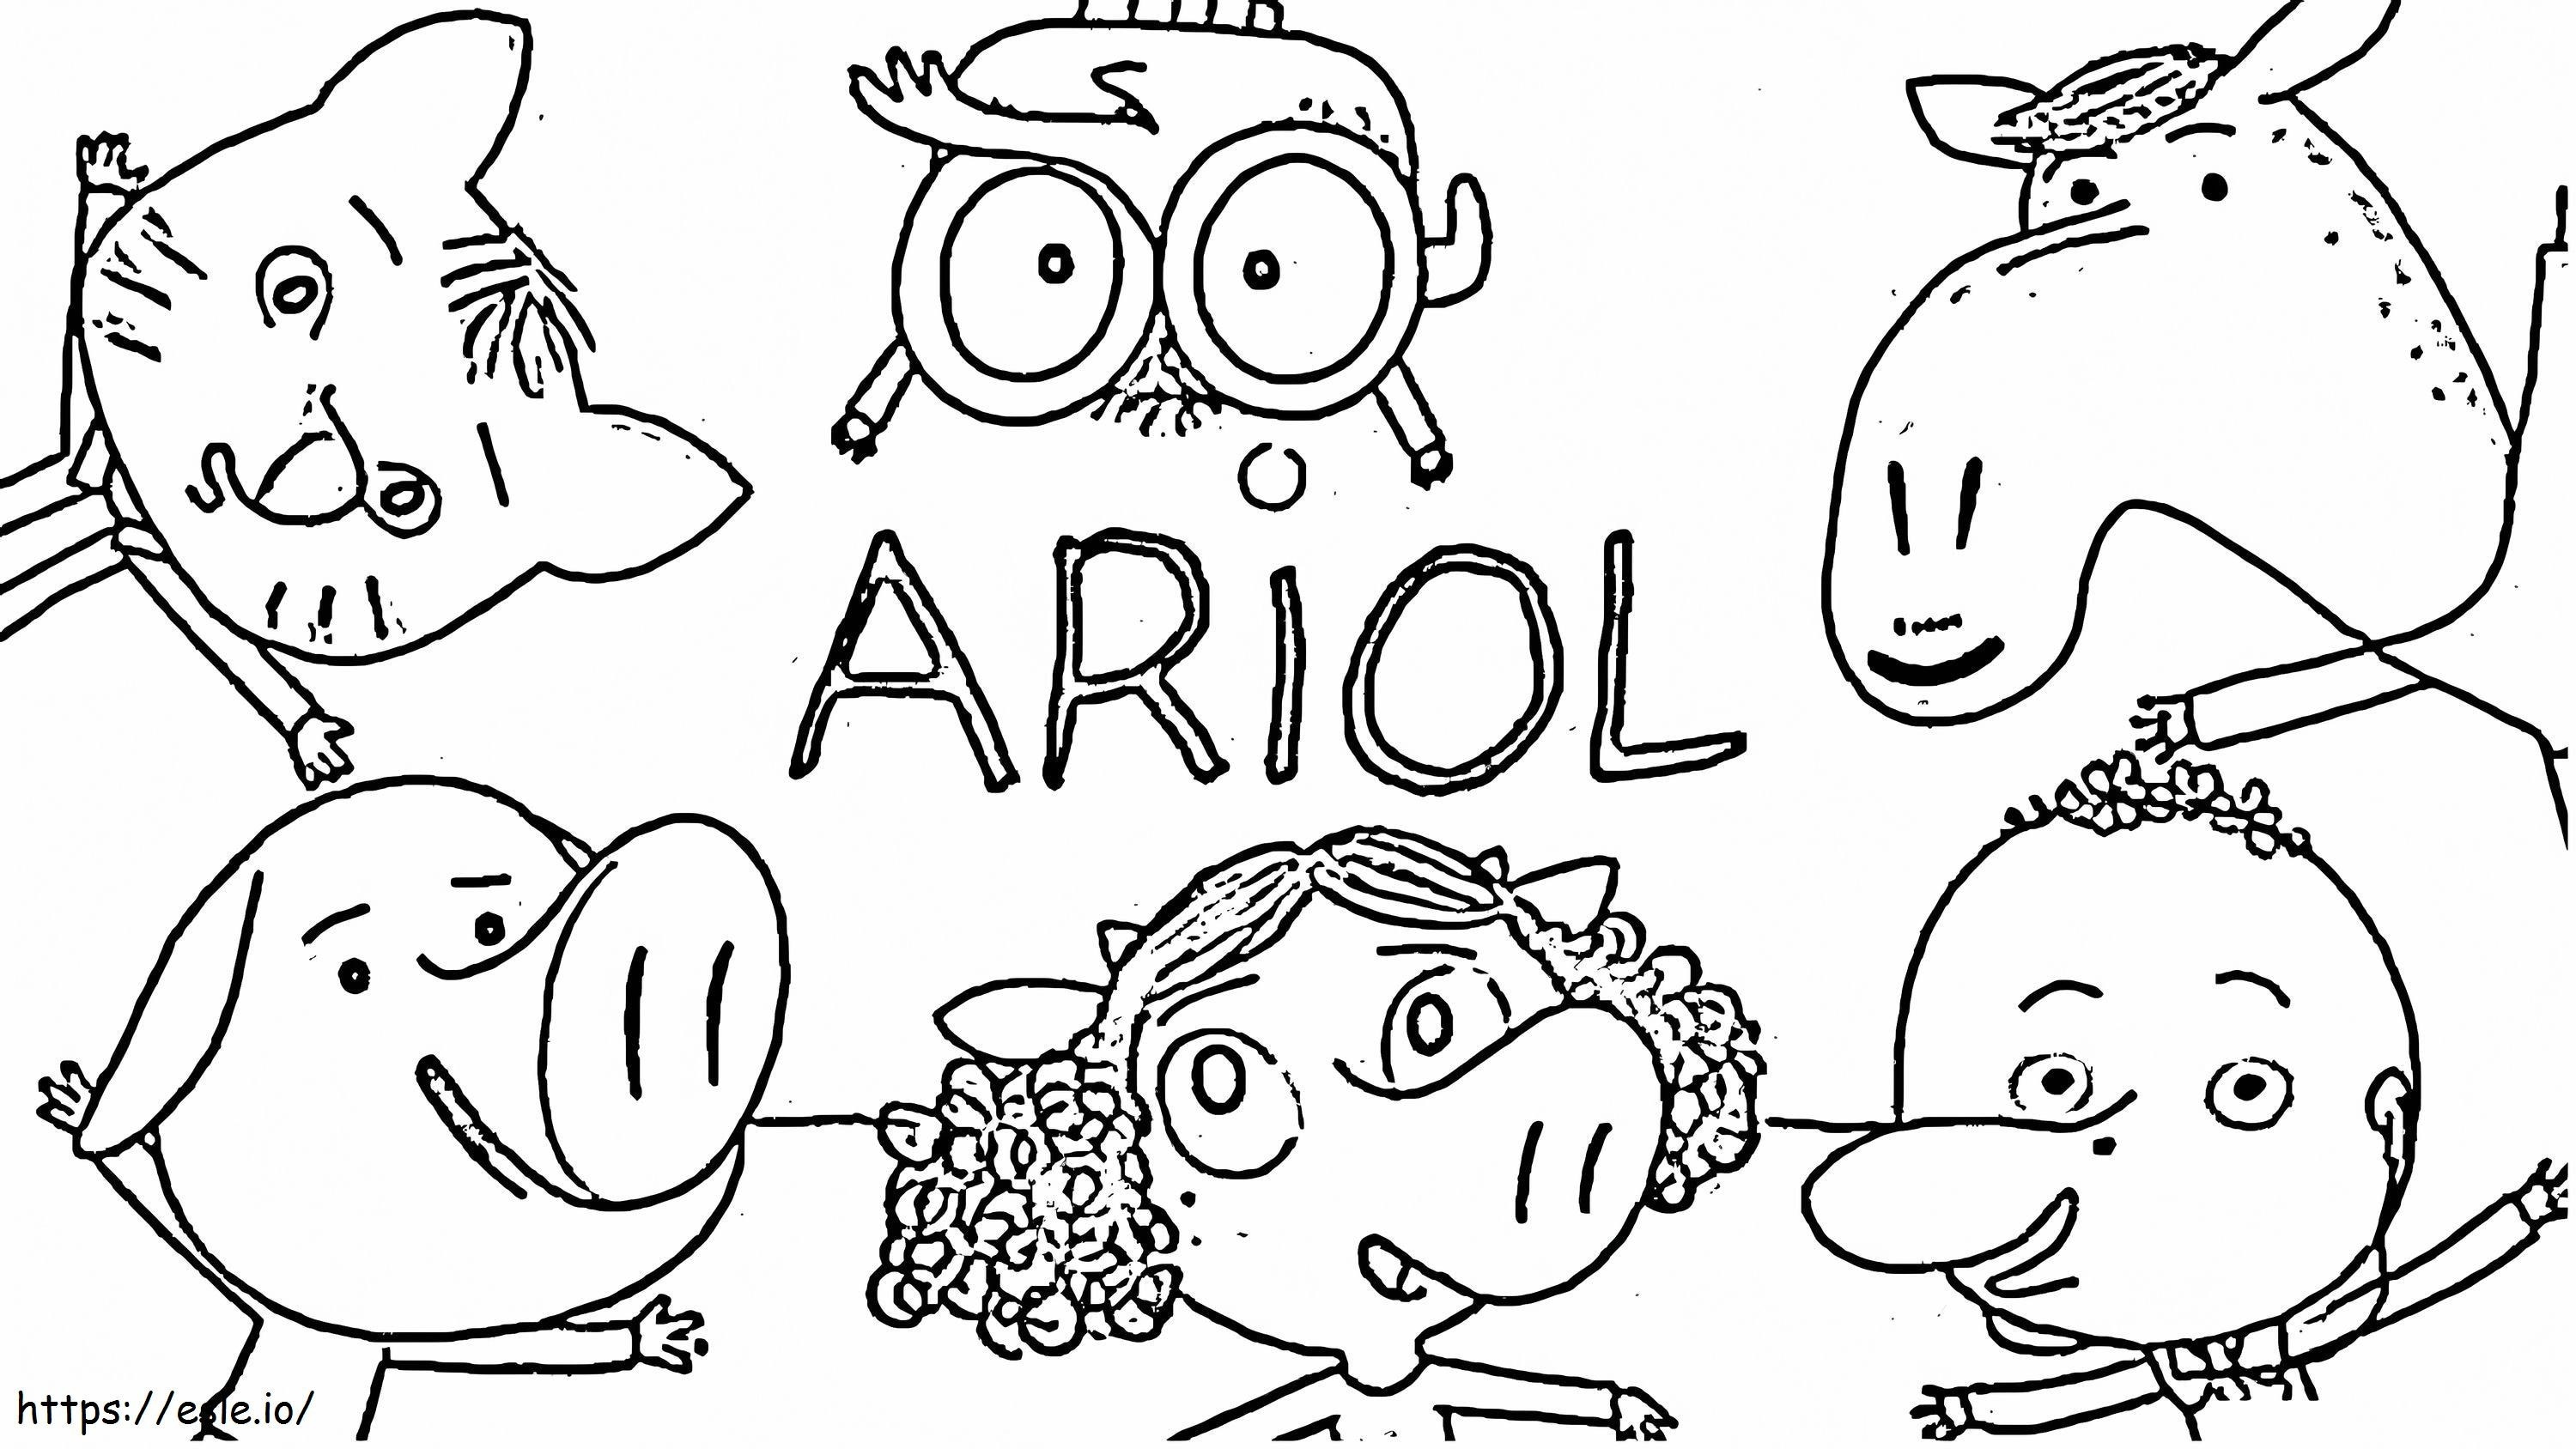 Ariol The Pilot coloring page